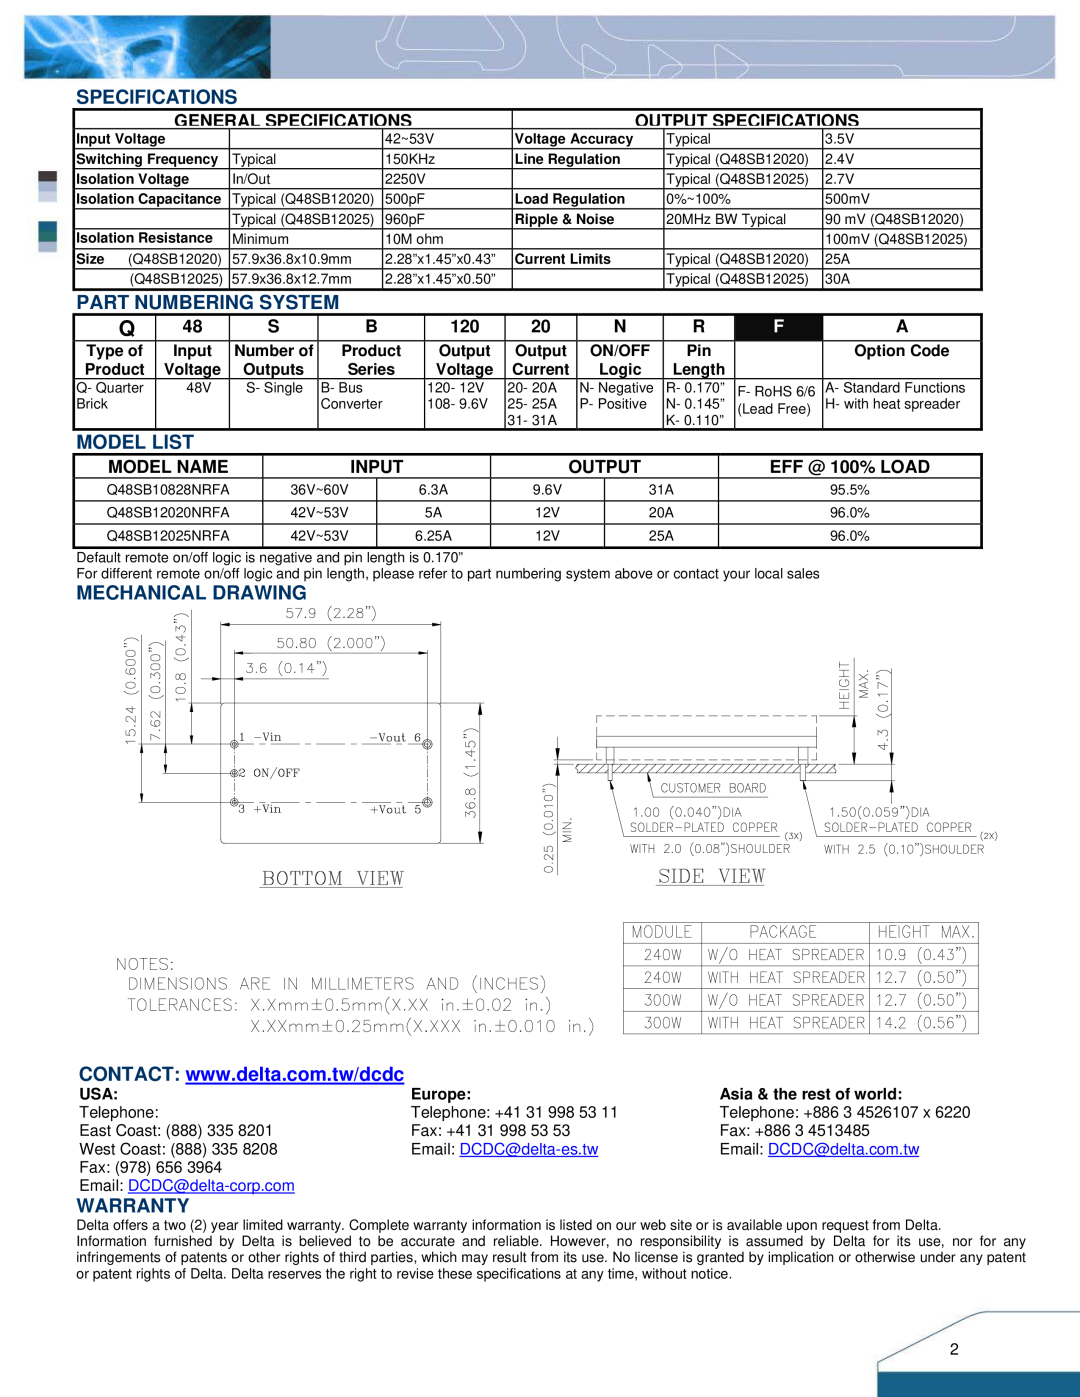 Delta Electronics Series Q48SB Specifications, Part Numbering System, Model List, Mechanical Drawing, Warranty, Model Name 